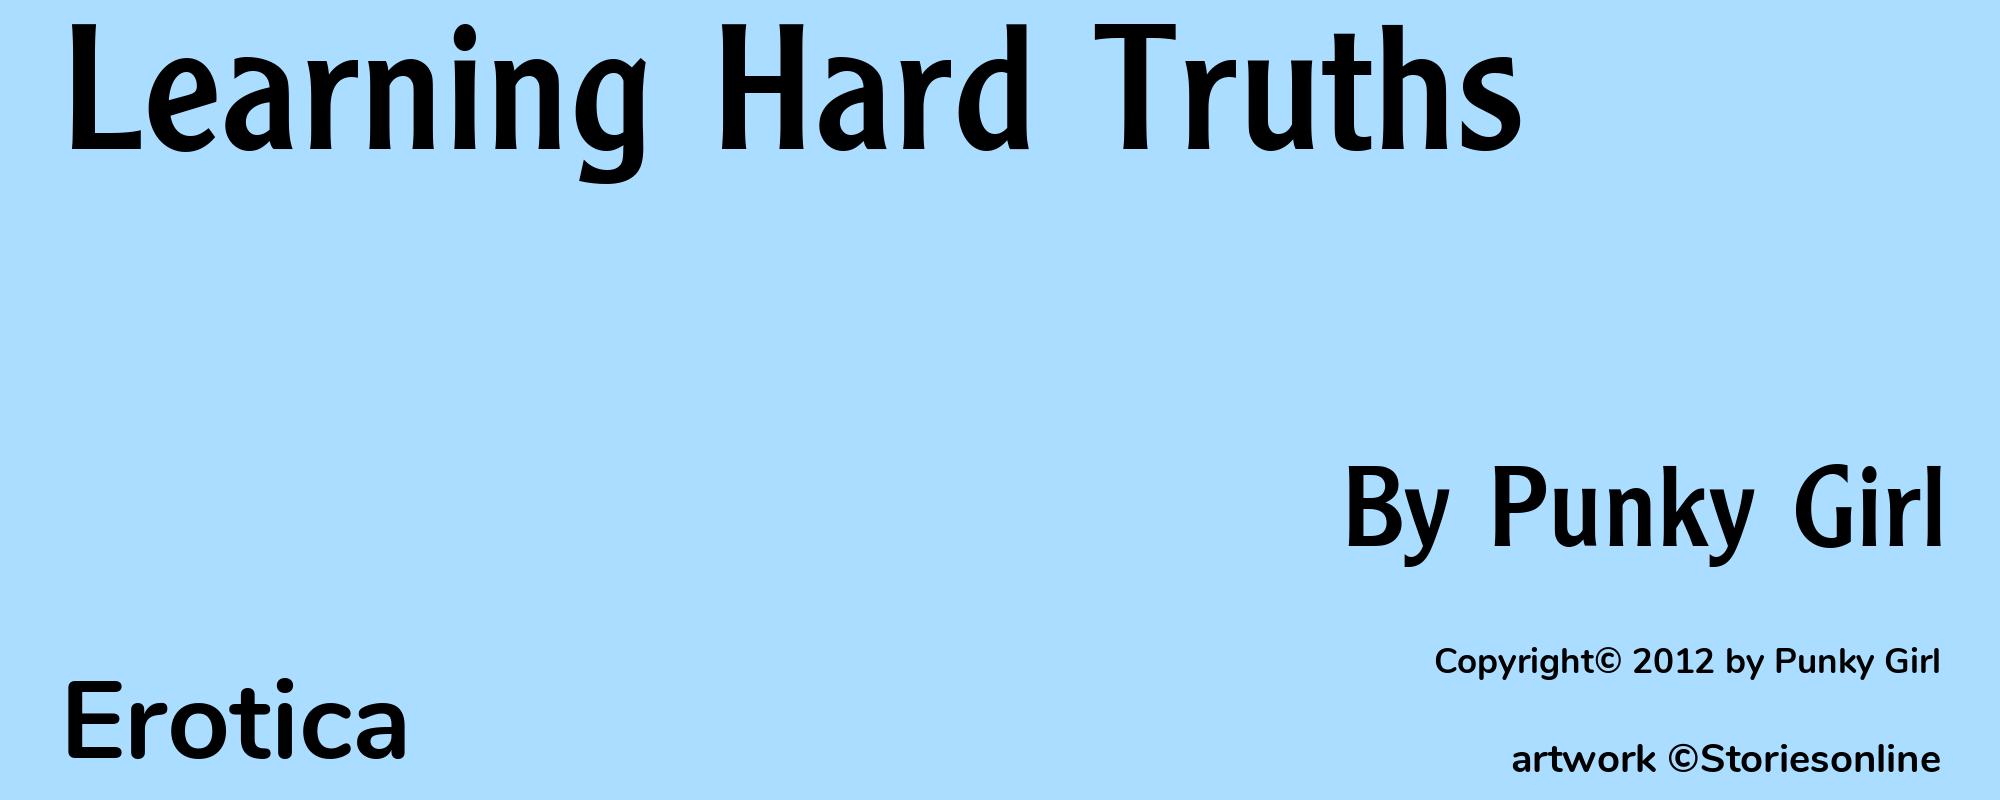 Learning Hard Truths - Cover